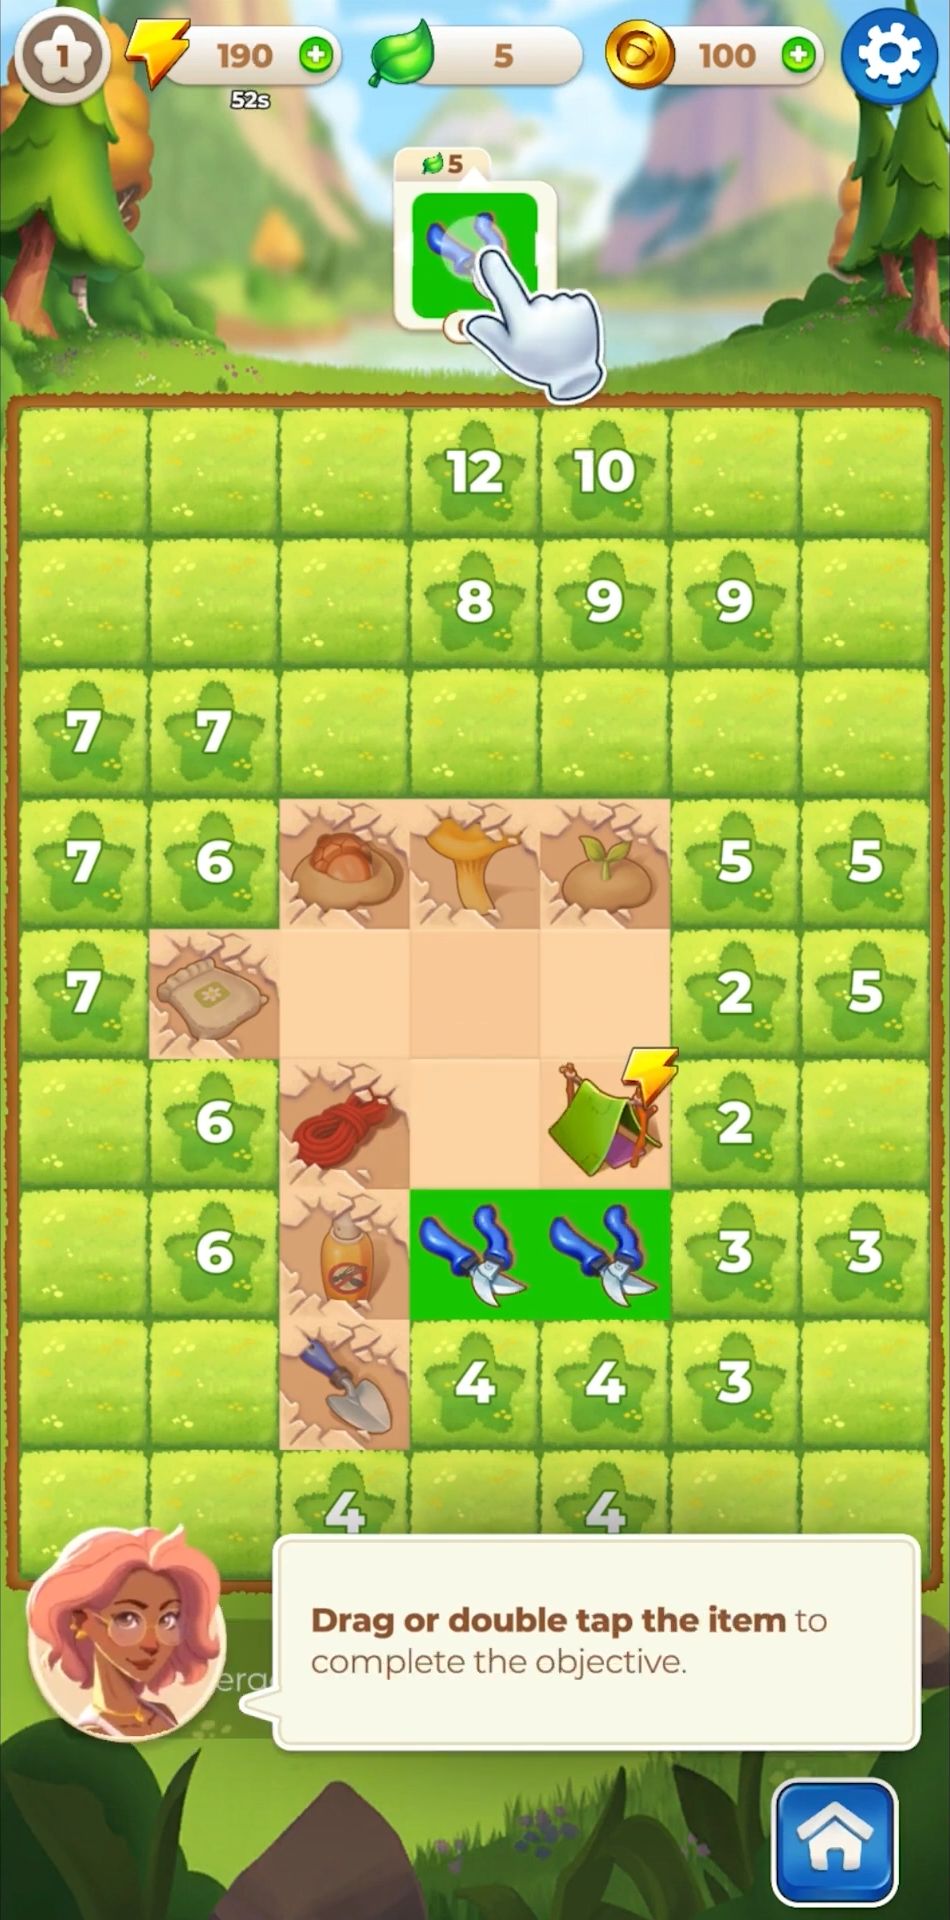 Full version of Android Logic game apk Longleaf Valley for tablet and phone.